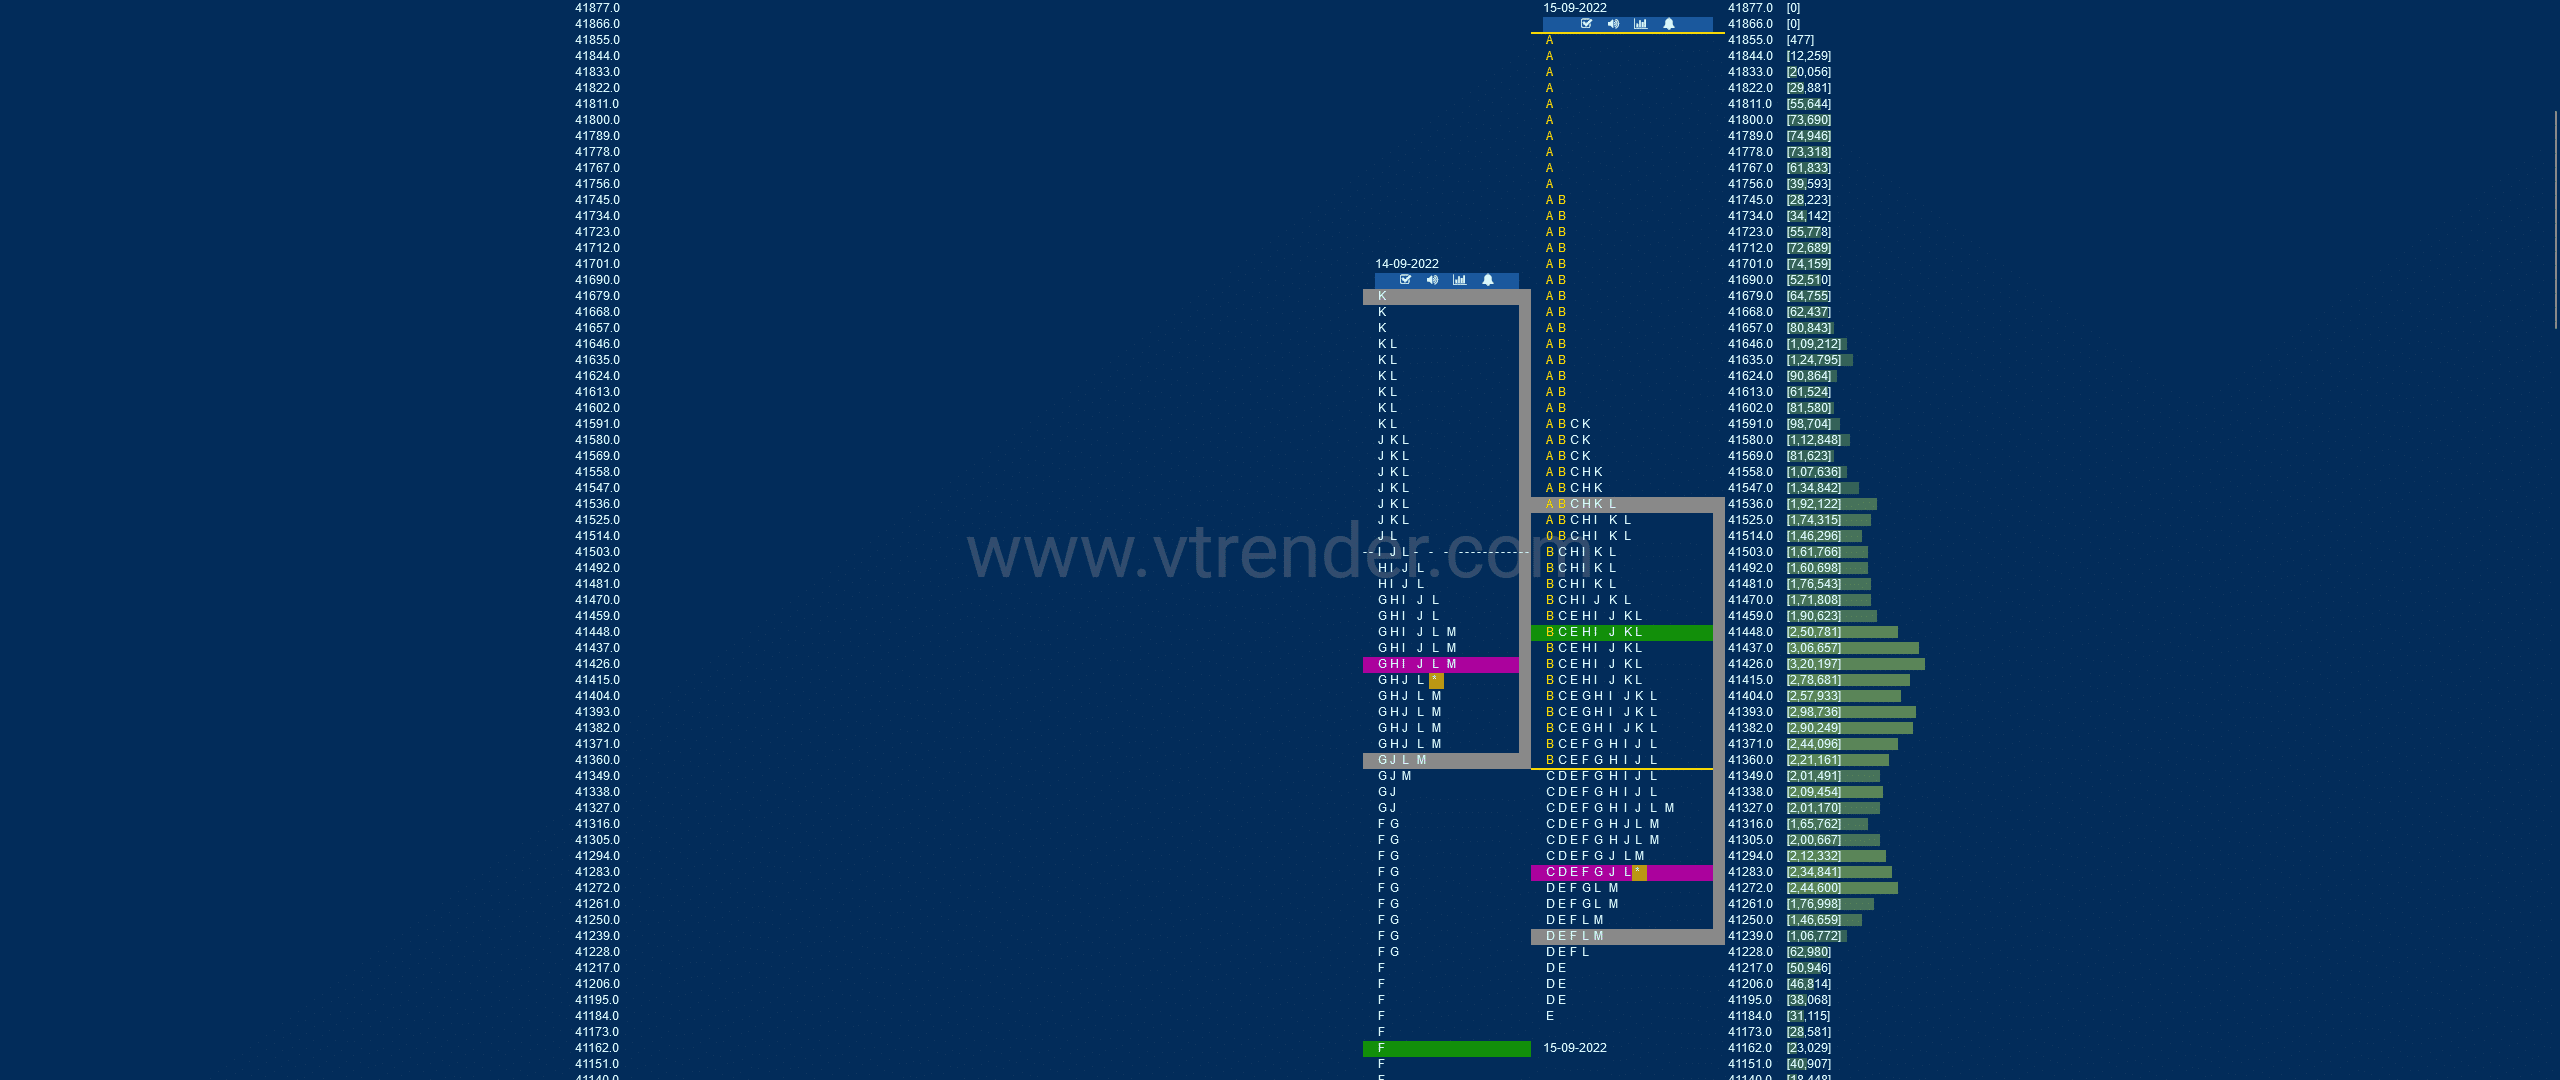 Bnf 10 Market Profile Analysis Dated 15Th Sep 2022 Banknifty Futures, Charts, Day Trading, Intraday Trading, Intraday Trading Strategies, Market Profile, Market Profile Trading Strategies, Nifty Futures, Order Flow Analysis, Support And Resistance, Technical Analysis, Trading Strategies, Volume Profile Trading